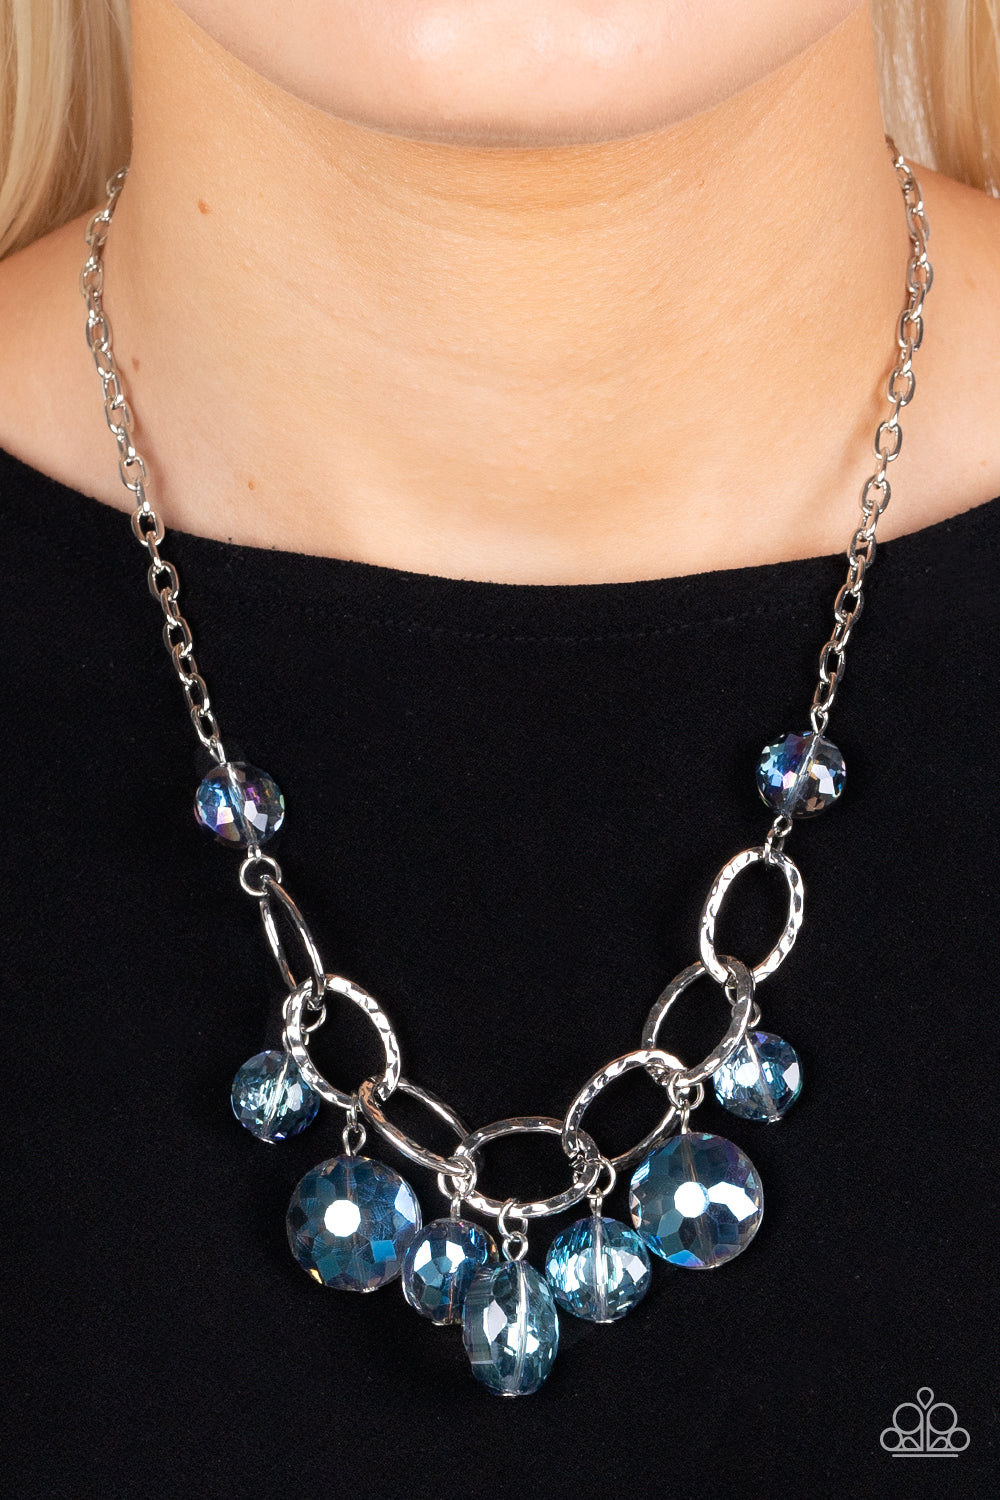 Rhinestone River - Blue Beads/Silver Oval Link Paparazzi Necklace & matching earrings